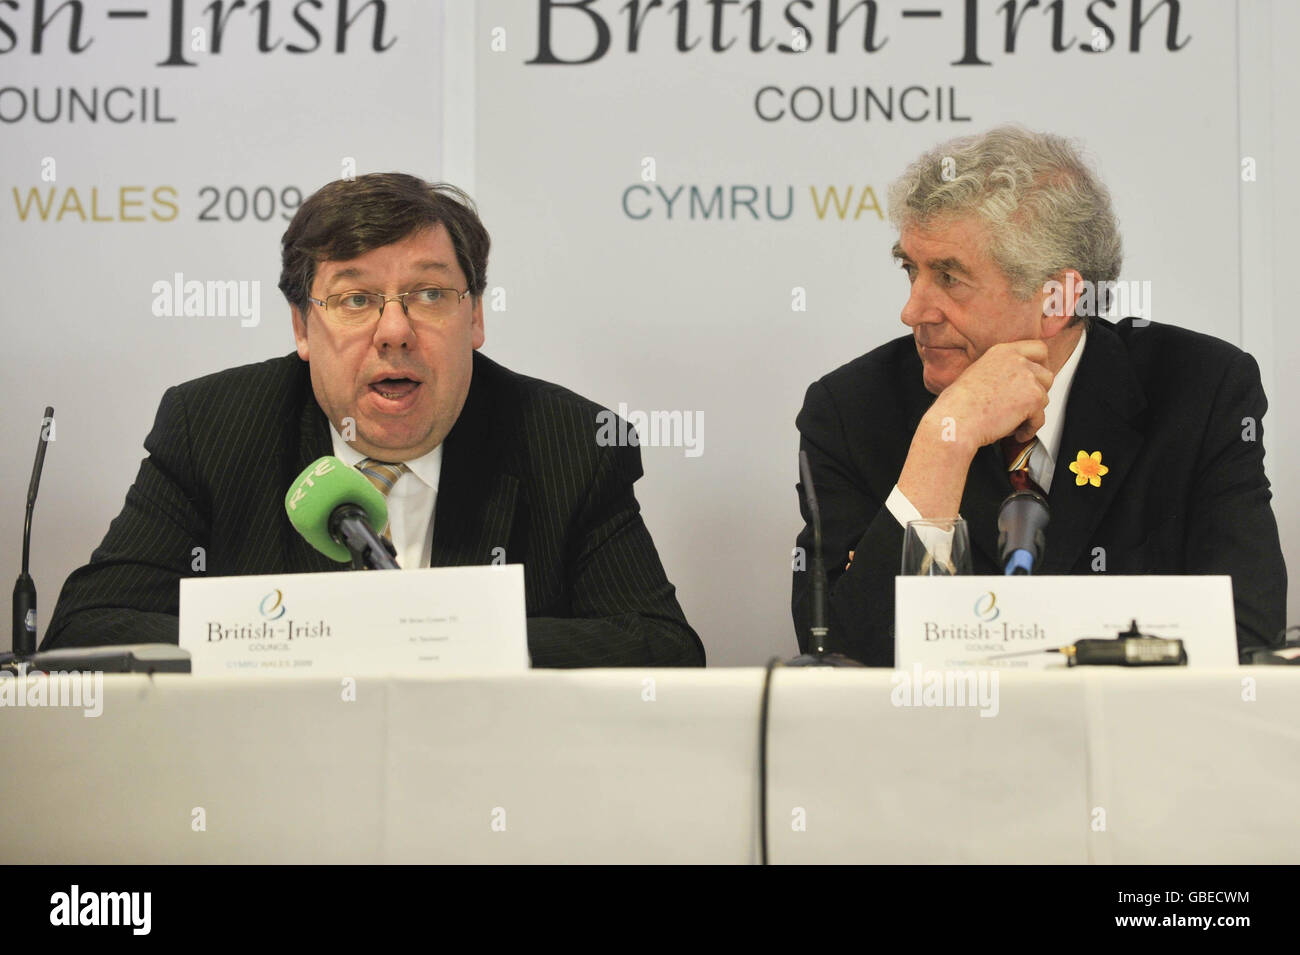 Taoiseach of Ireland Brian Cowen (left) and Welsh First Minister Rhodri Morgan listen to questions during a press conference at the British-Irish council meeting in the Swalec Stadium, Cardiff, Wales. Stock Photo